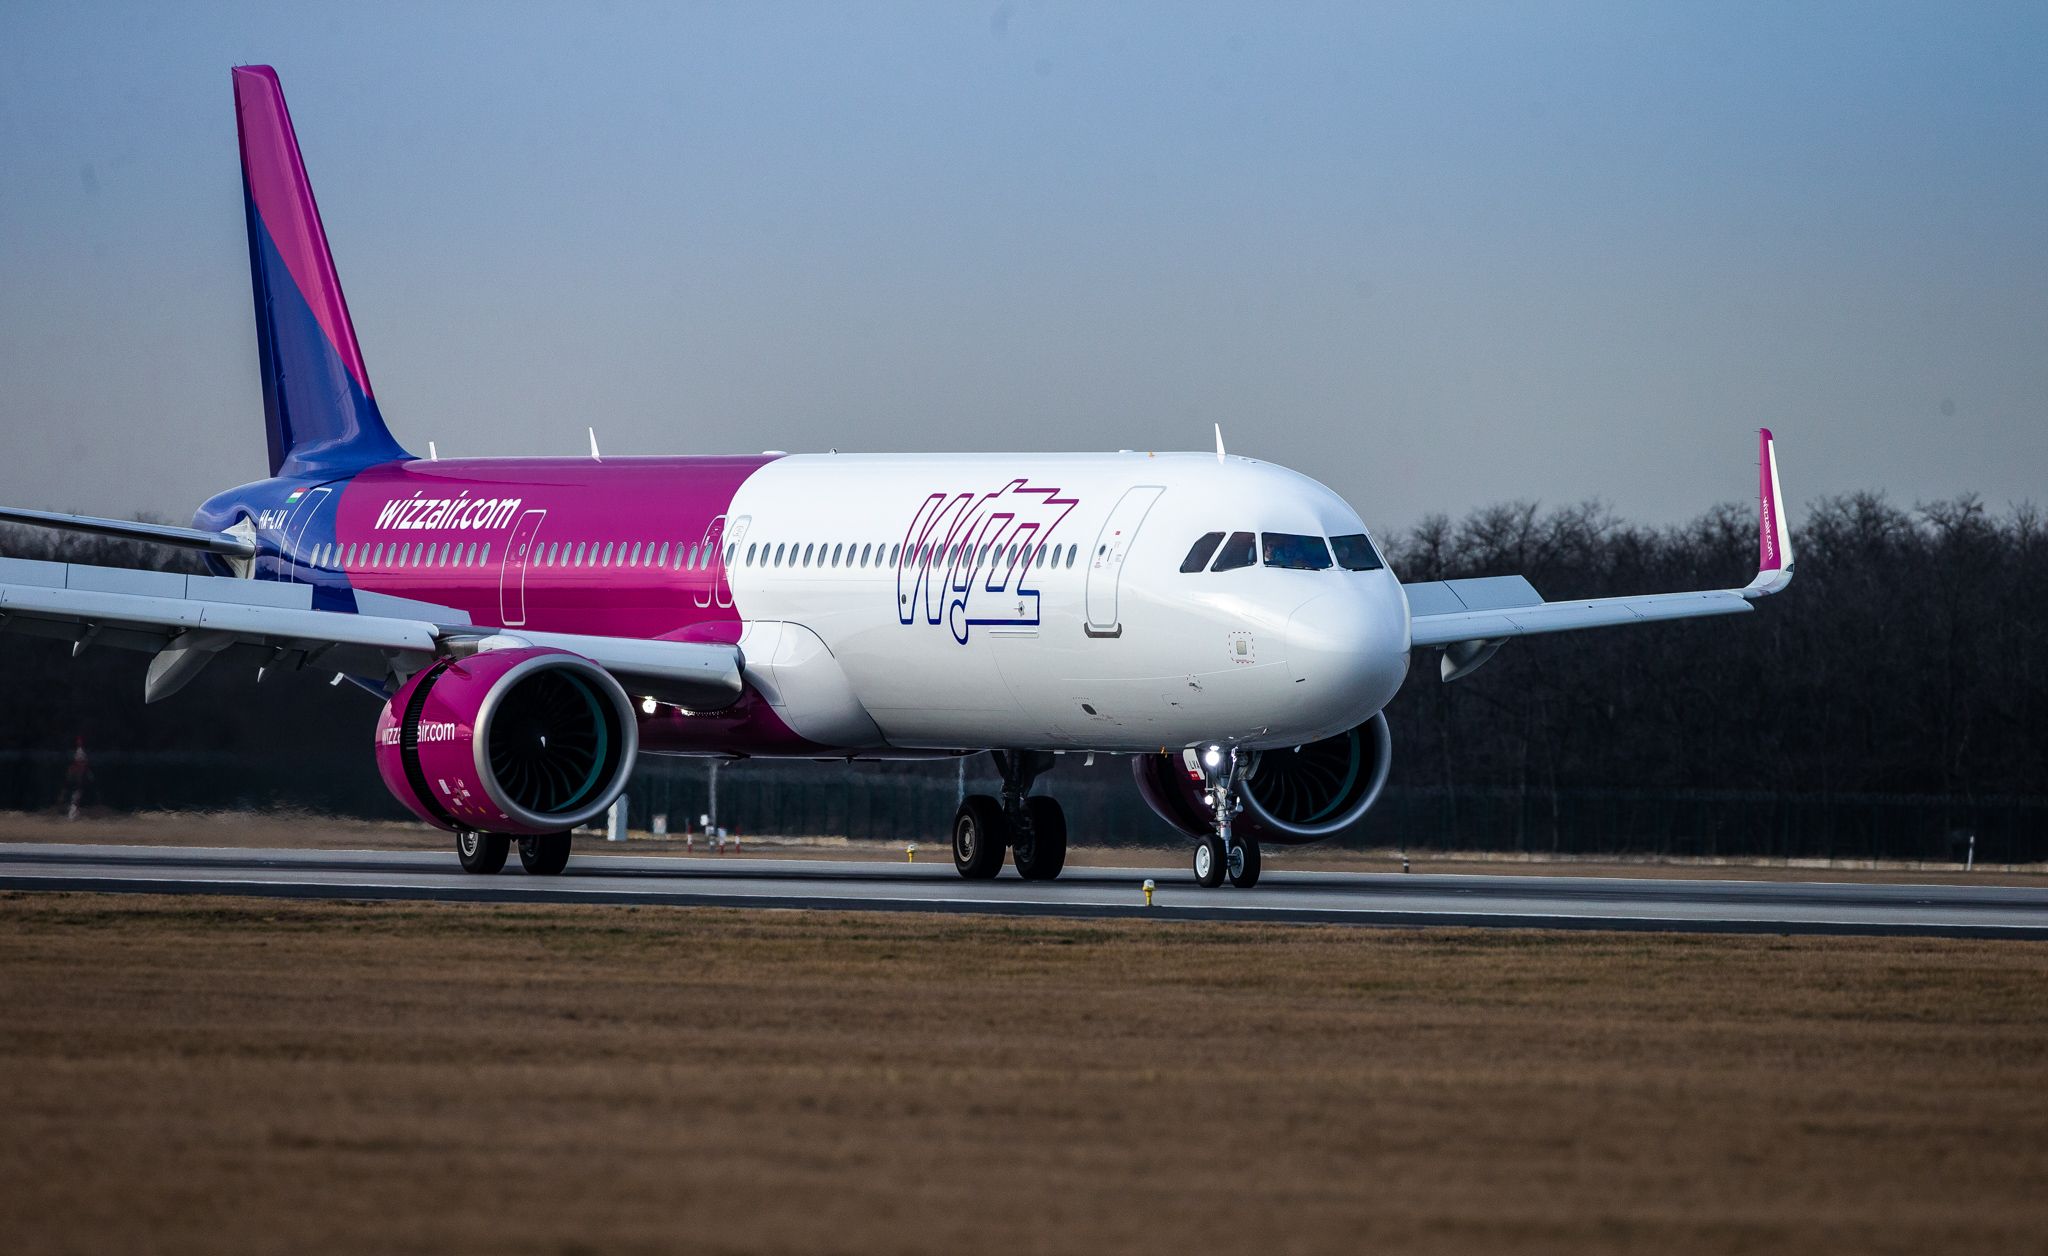 Wizz Airbus A321neo